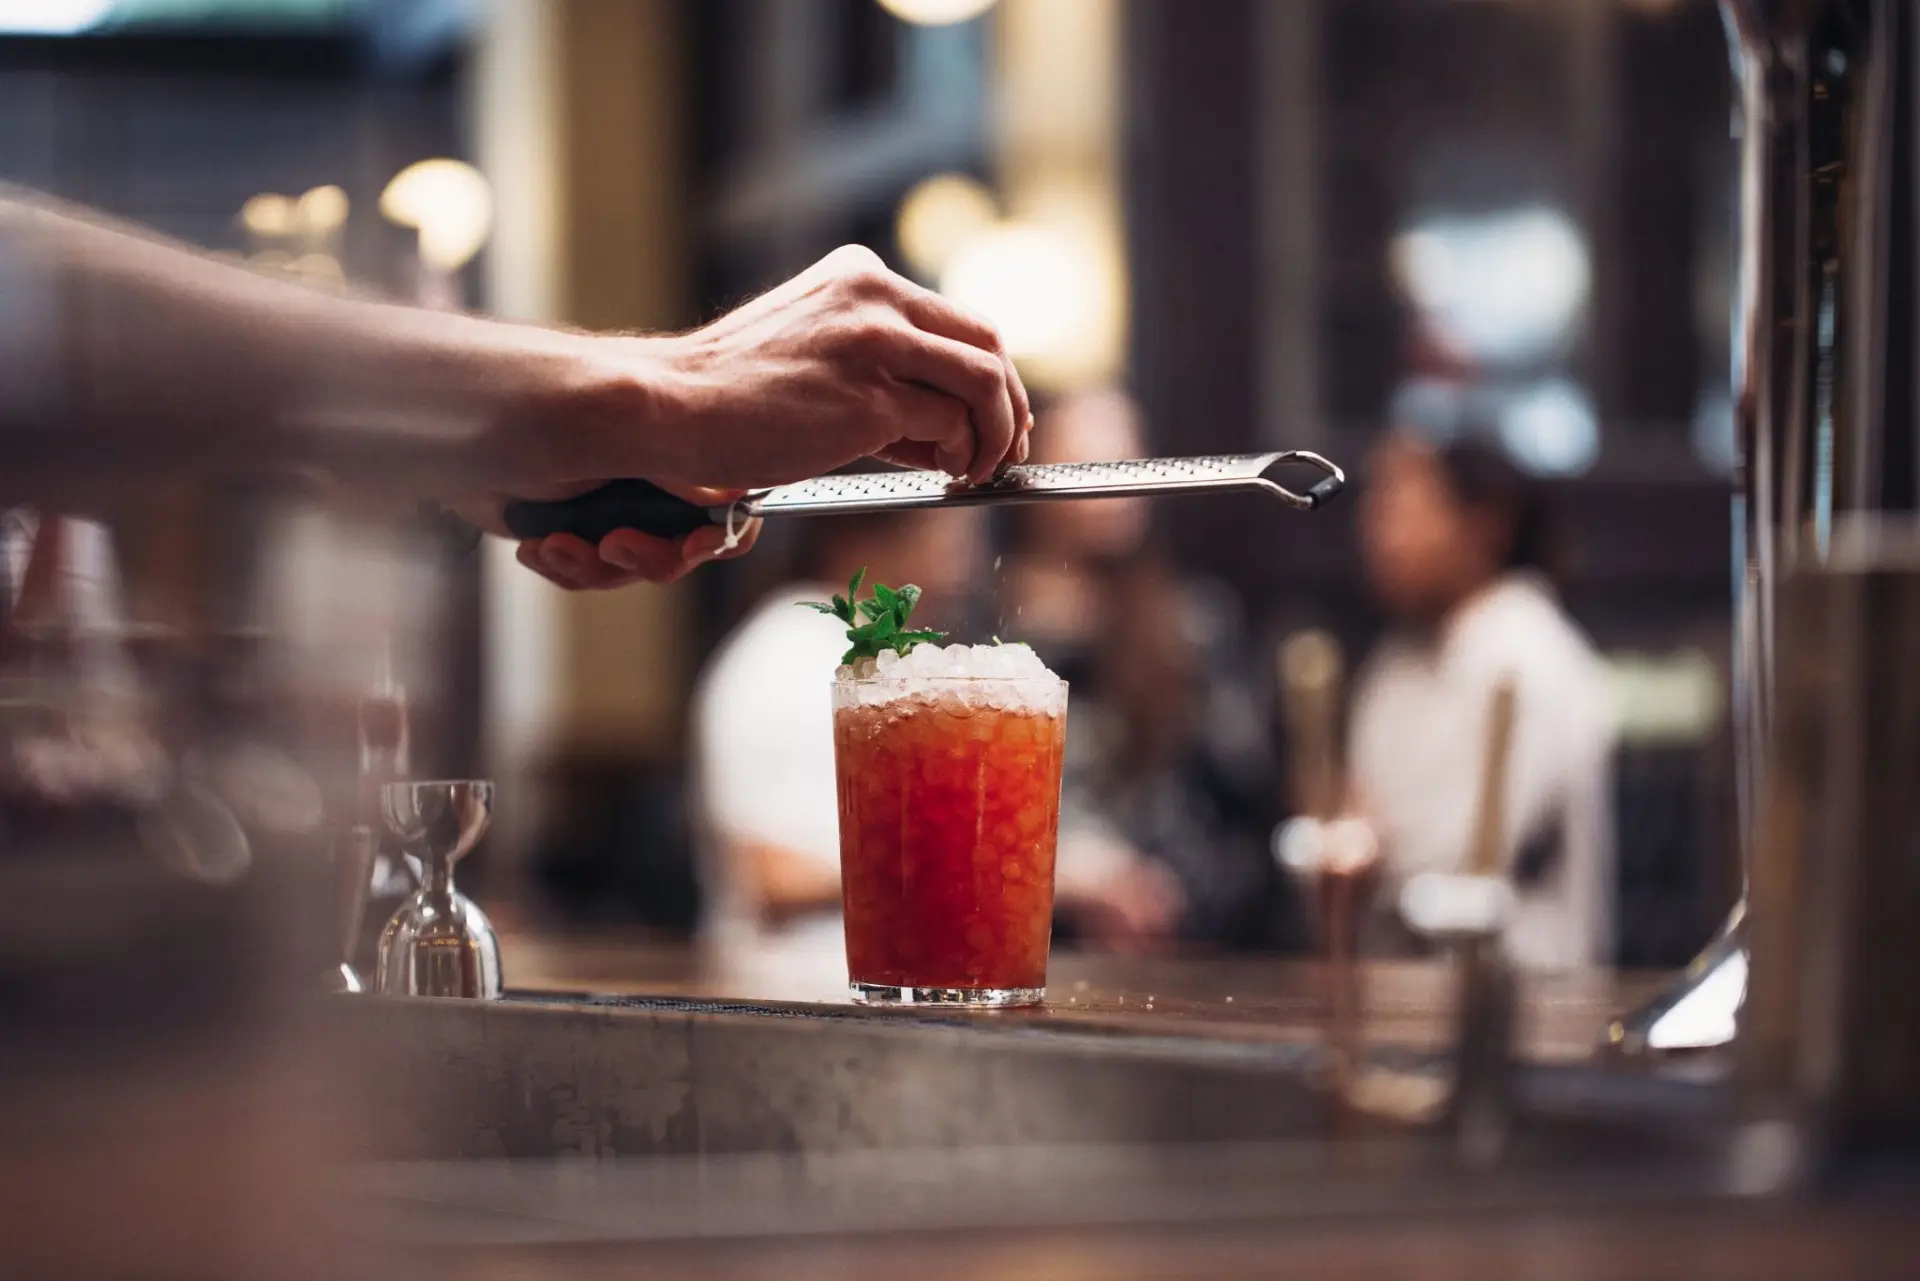 fruit cocktail on table topped with ice while a bartender grates ingredient over glass